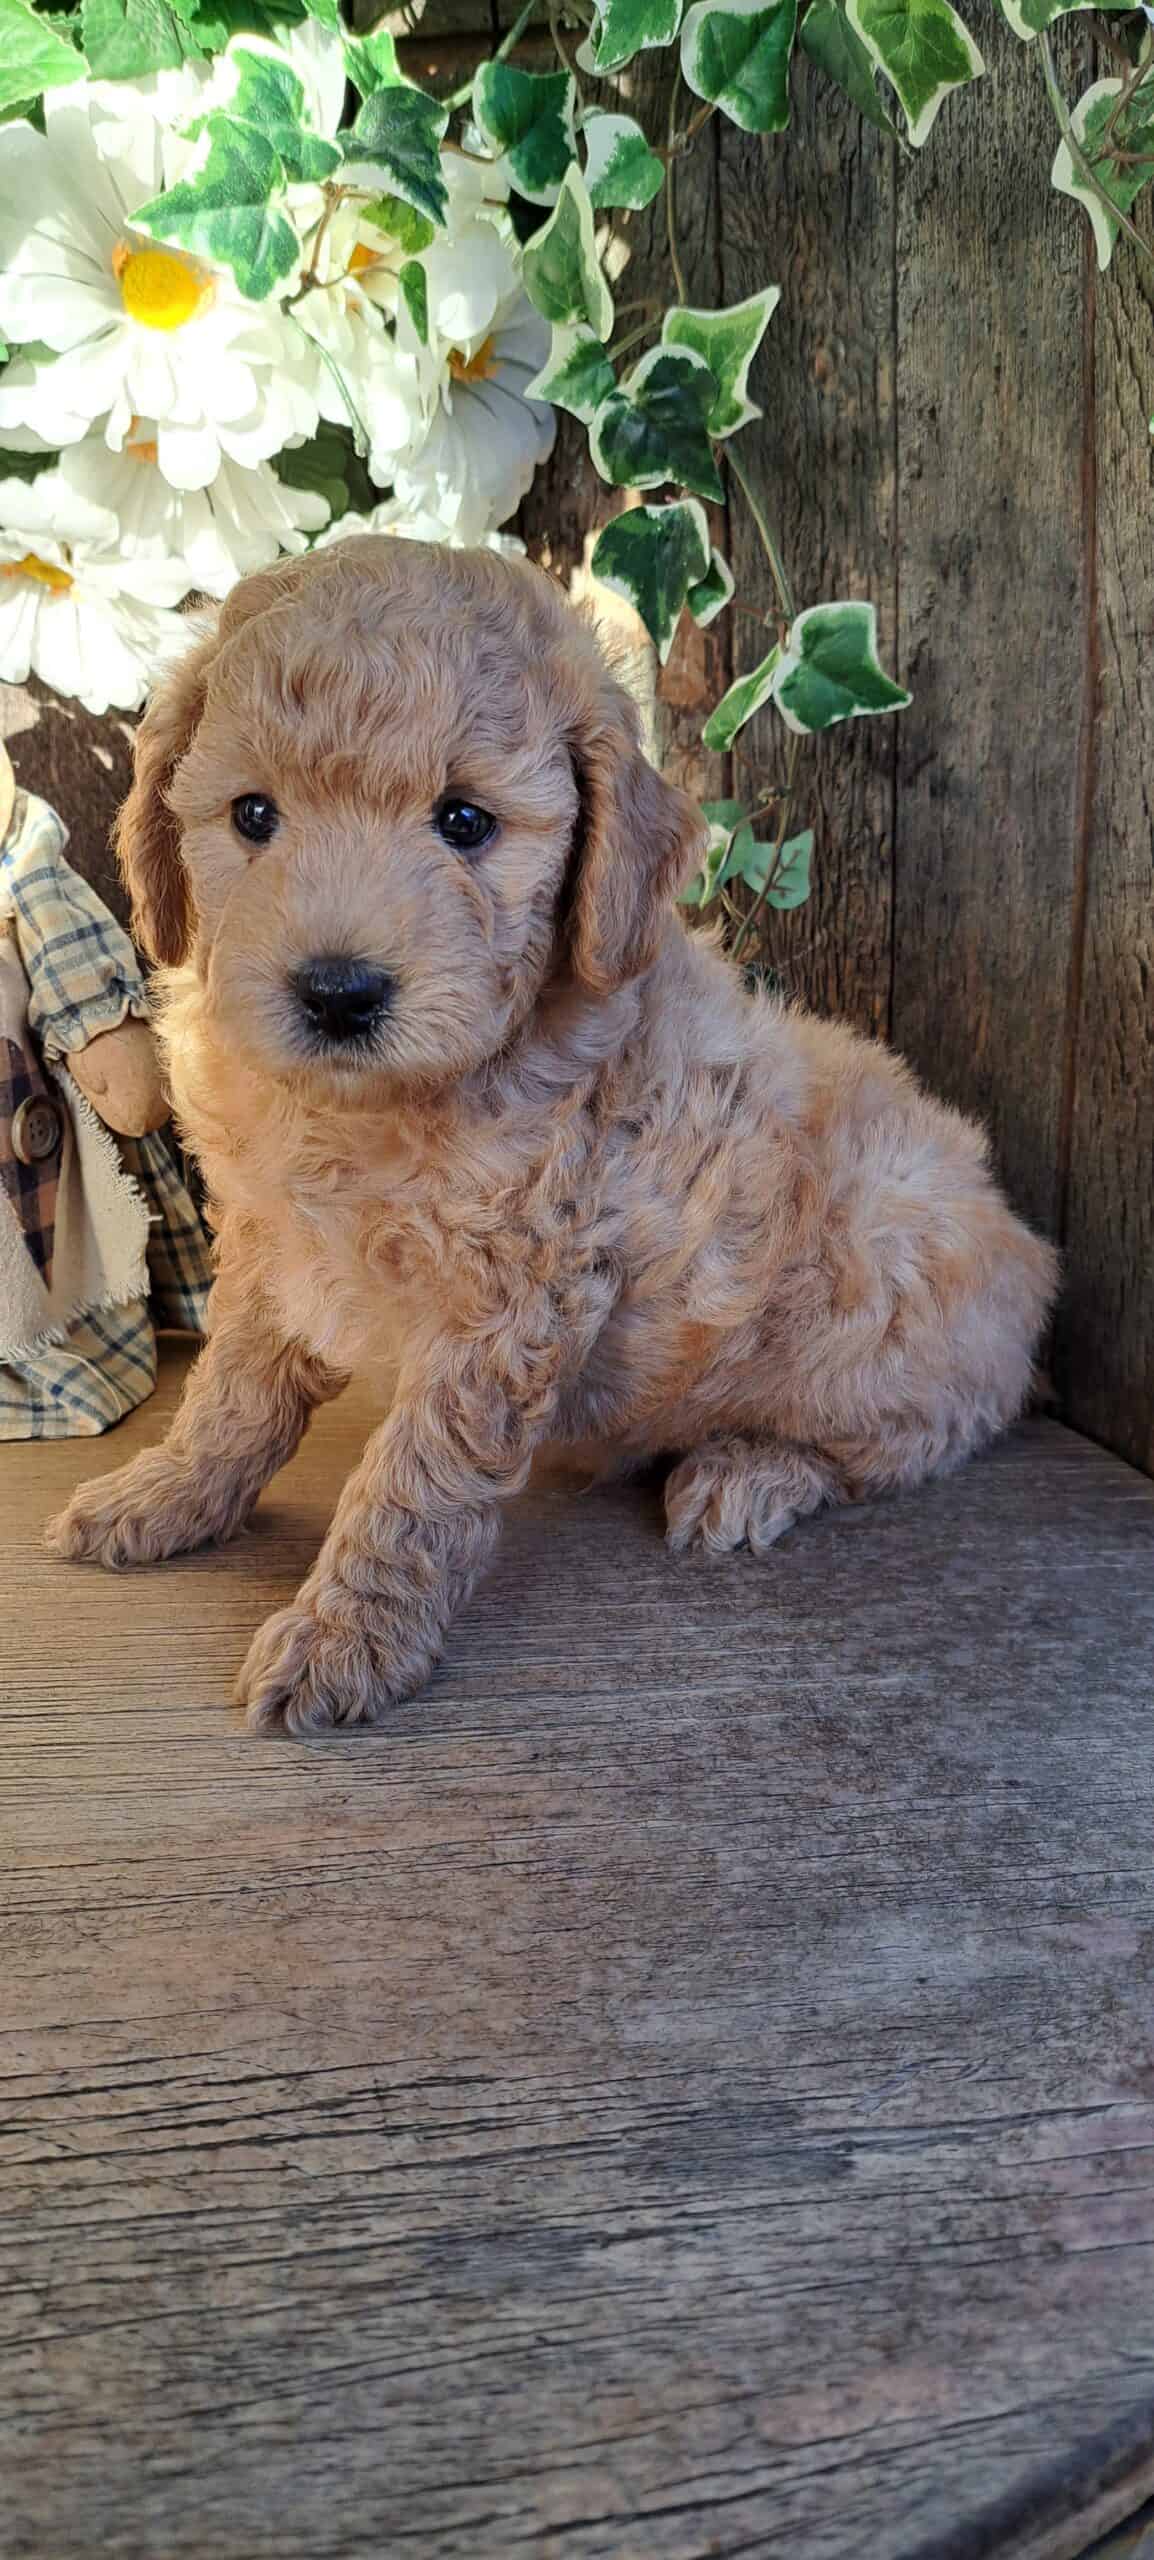 F1b Mini Goldendoodle puppies, ready NOW!